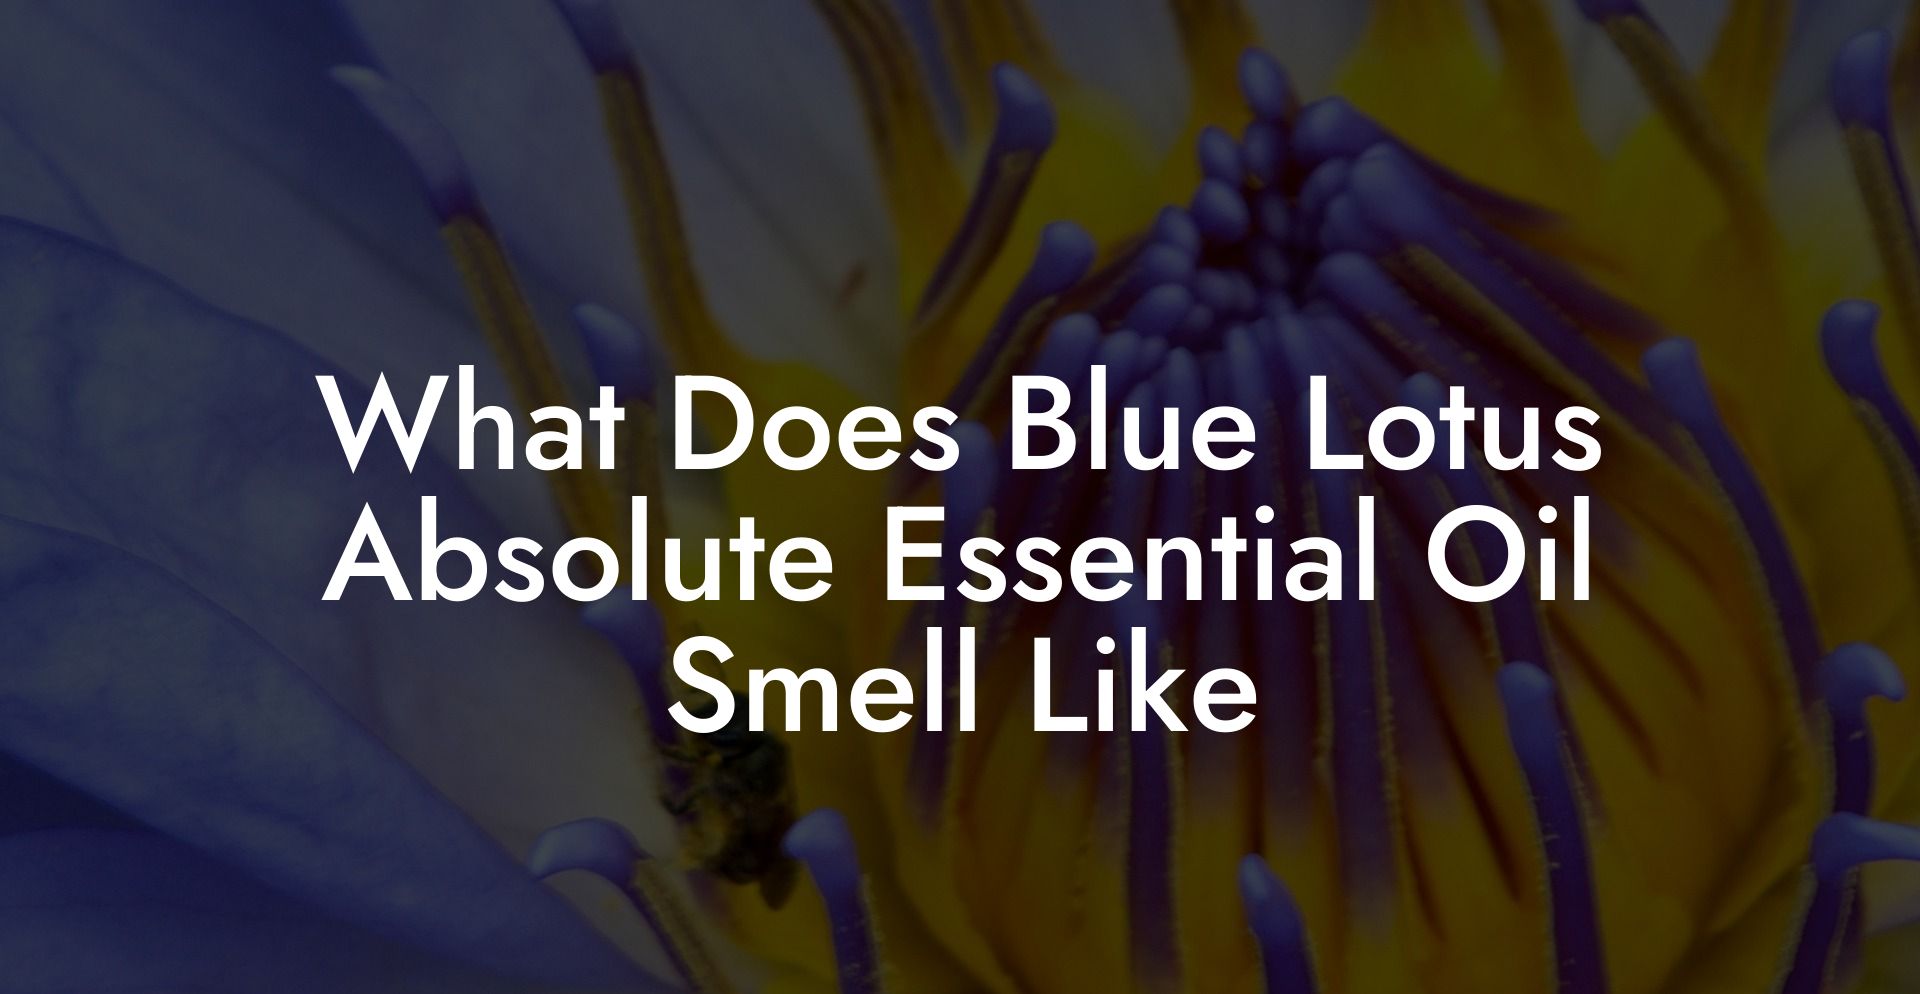 What Does Blue Lotus Absolute Essential Oil Smell Like